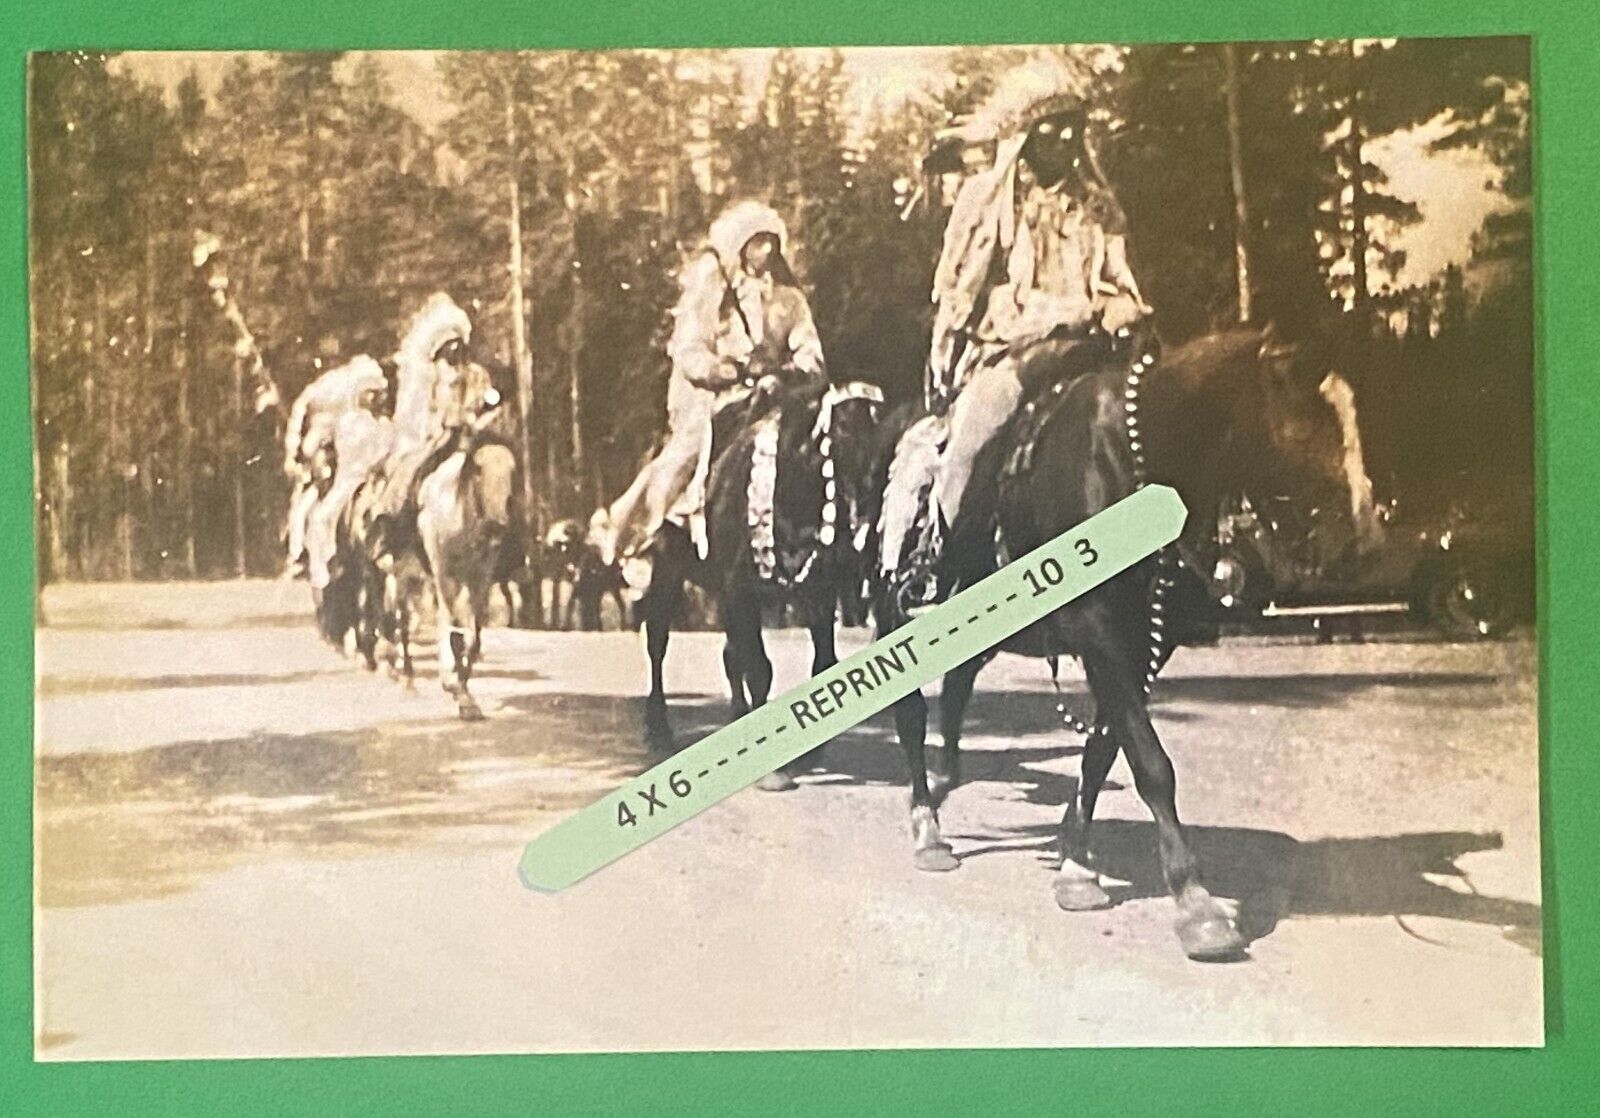 Found 4X6 PHOTO of Old Native American Indians in Full Dress on Horse Back